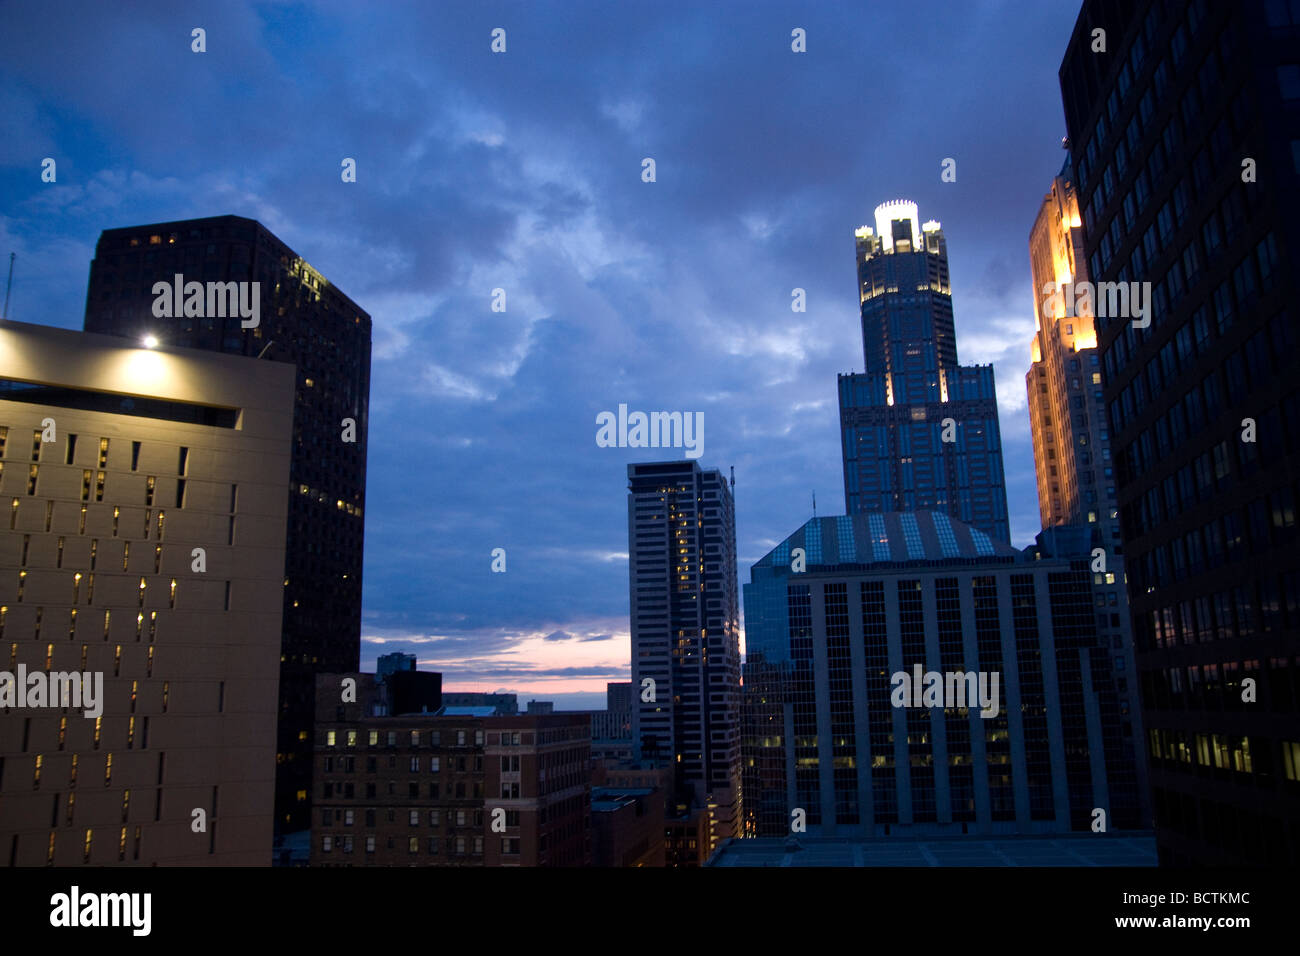 Tall buildings in South Loop in Chicago at night Stock Photo